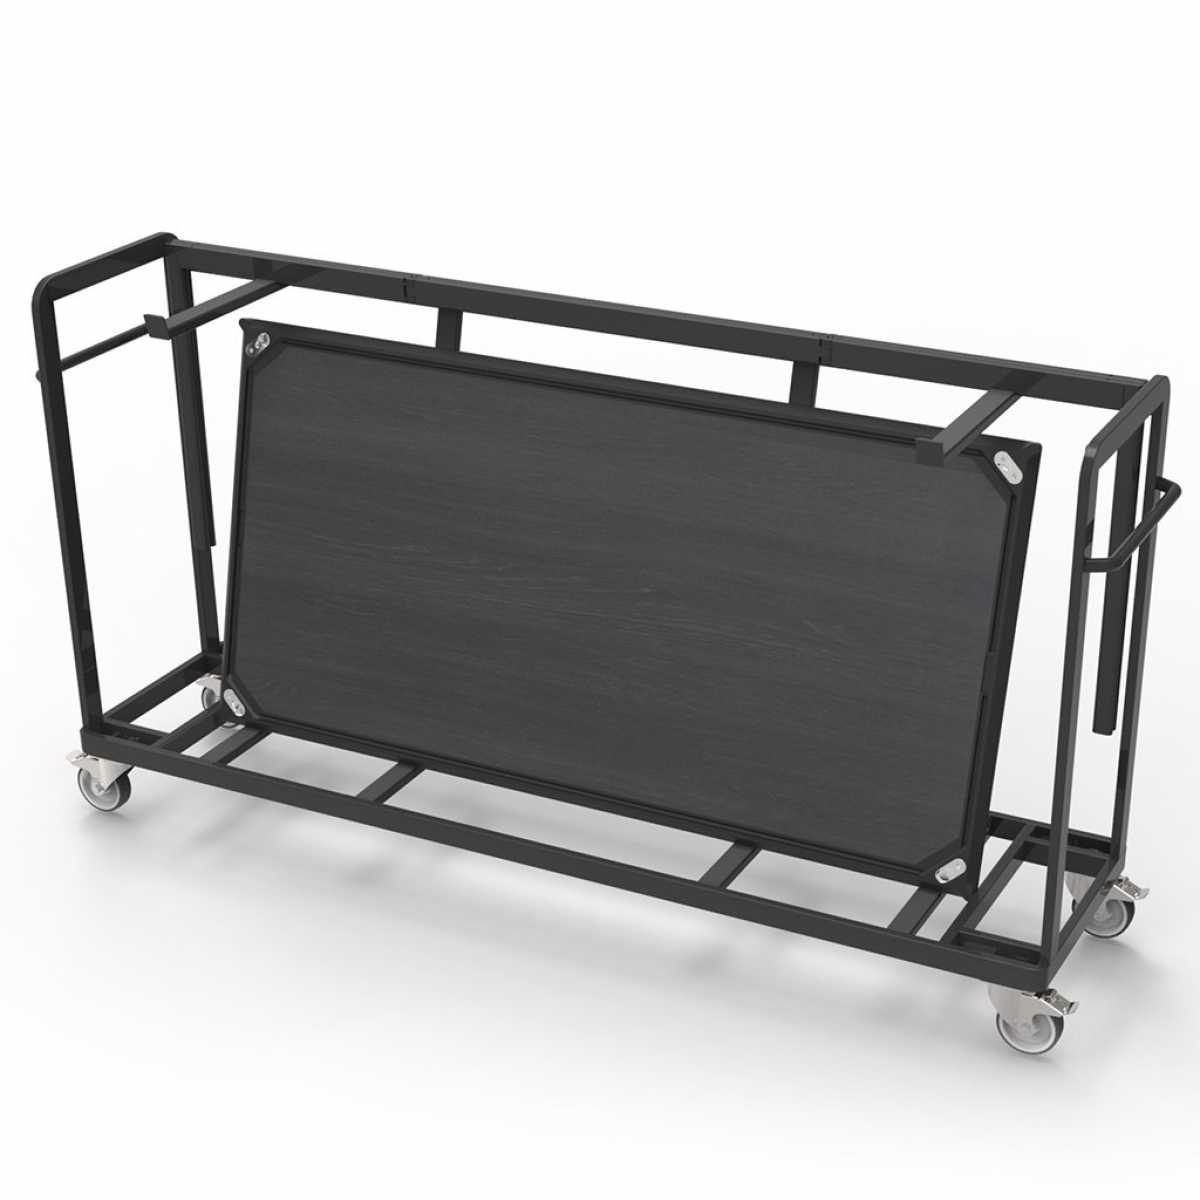 CRASTER 1800 Rectangle – Trolley